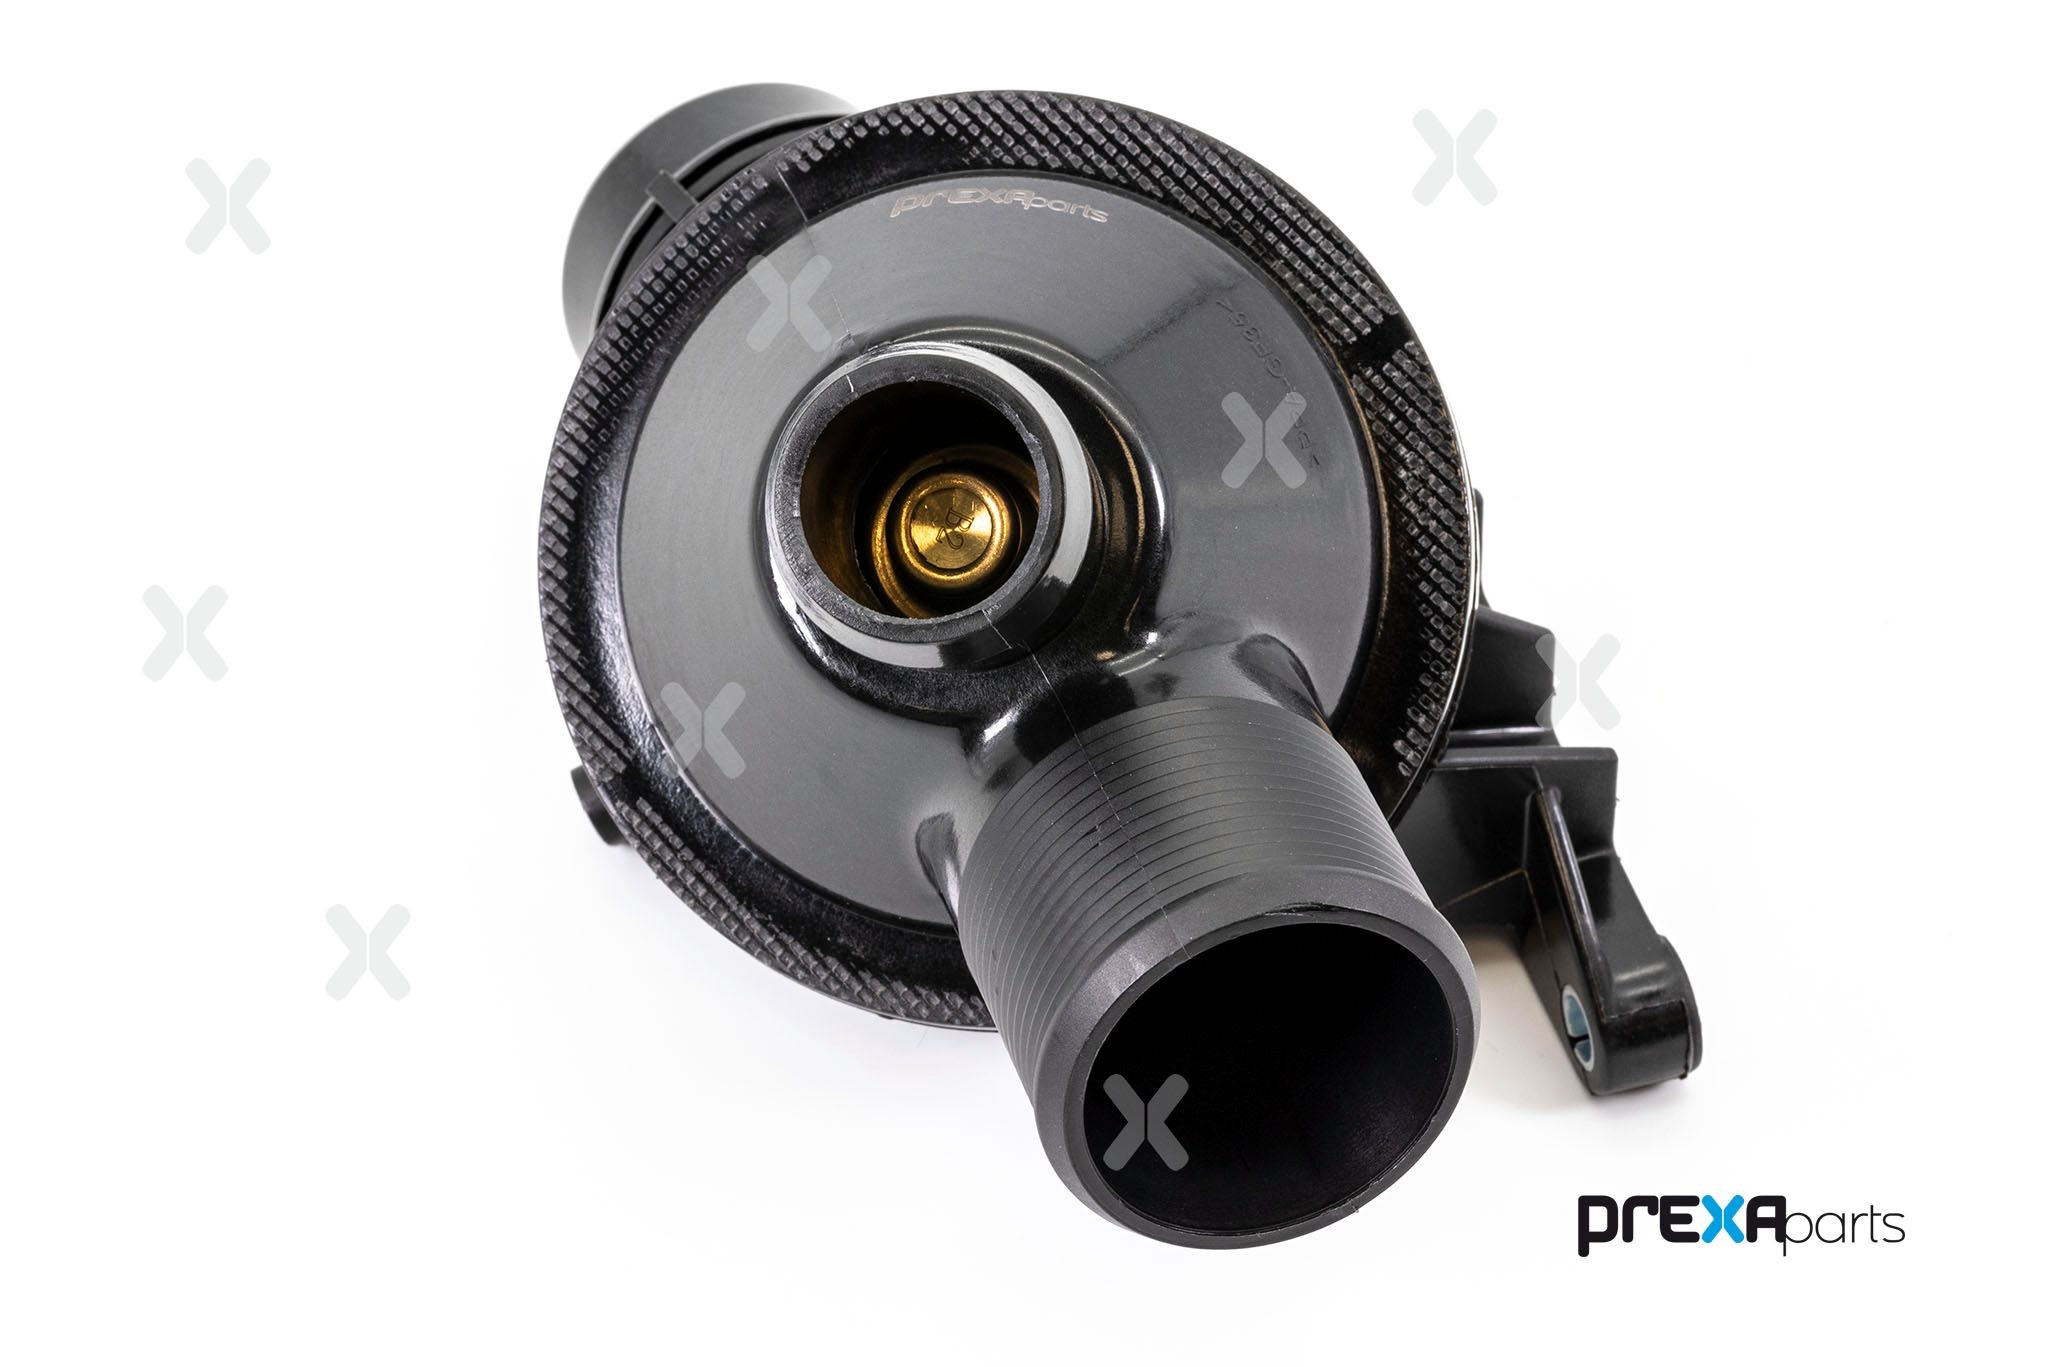 OEM-quality PREXAparts P207016 Thermostat in engine cooling system